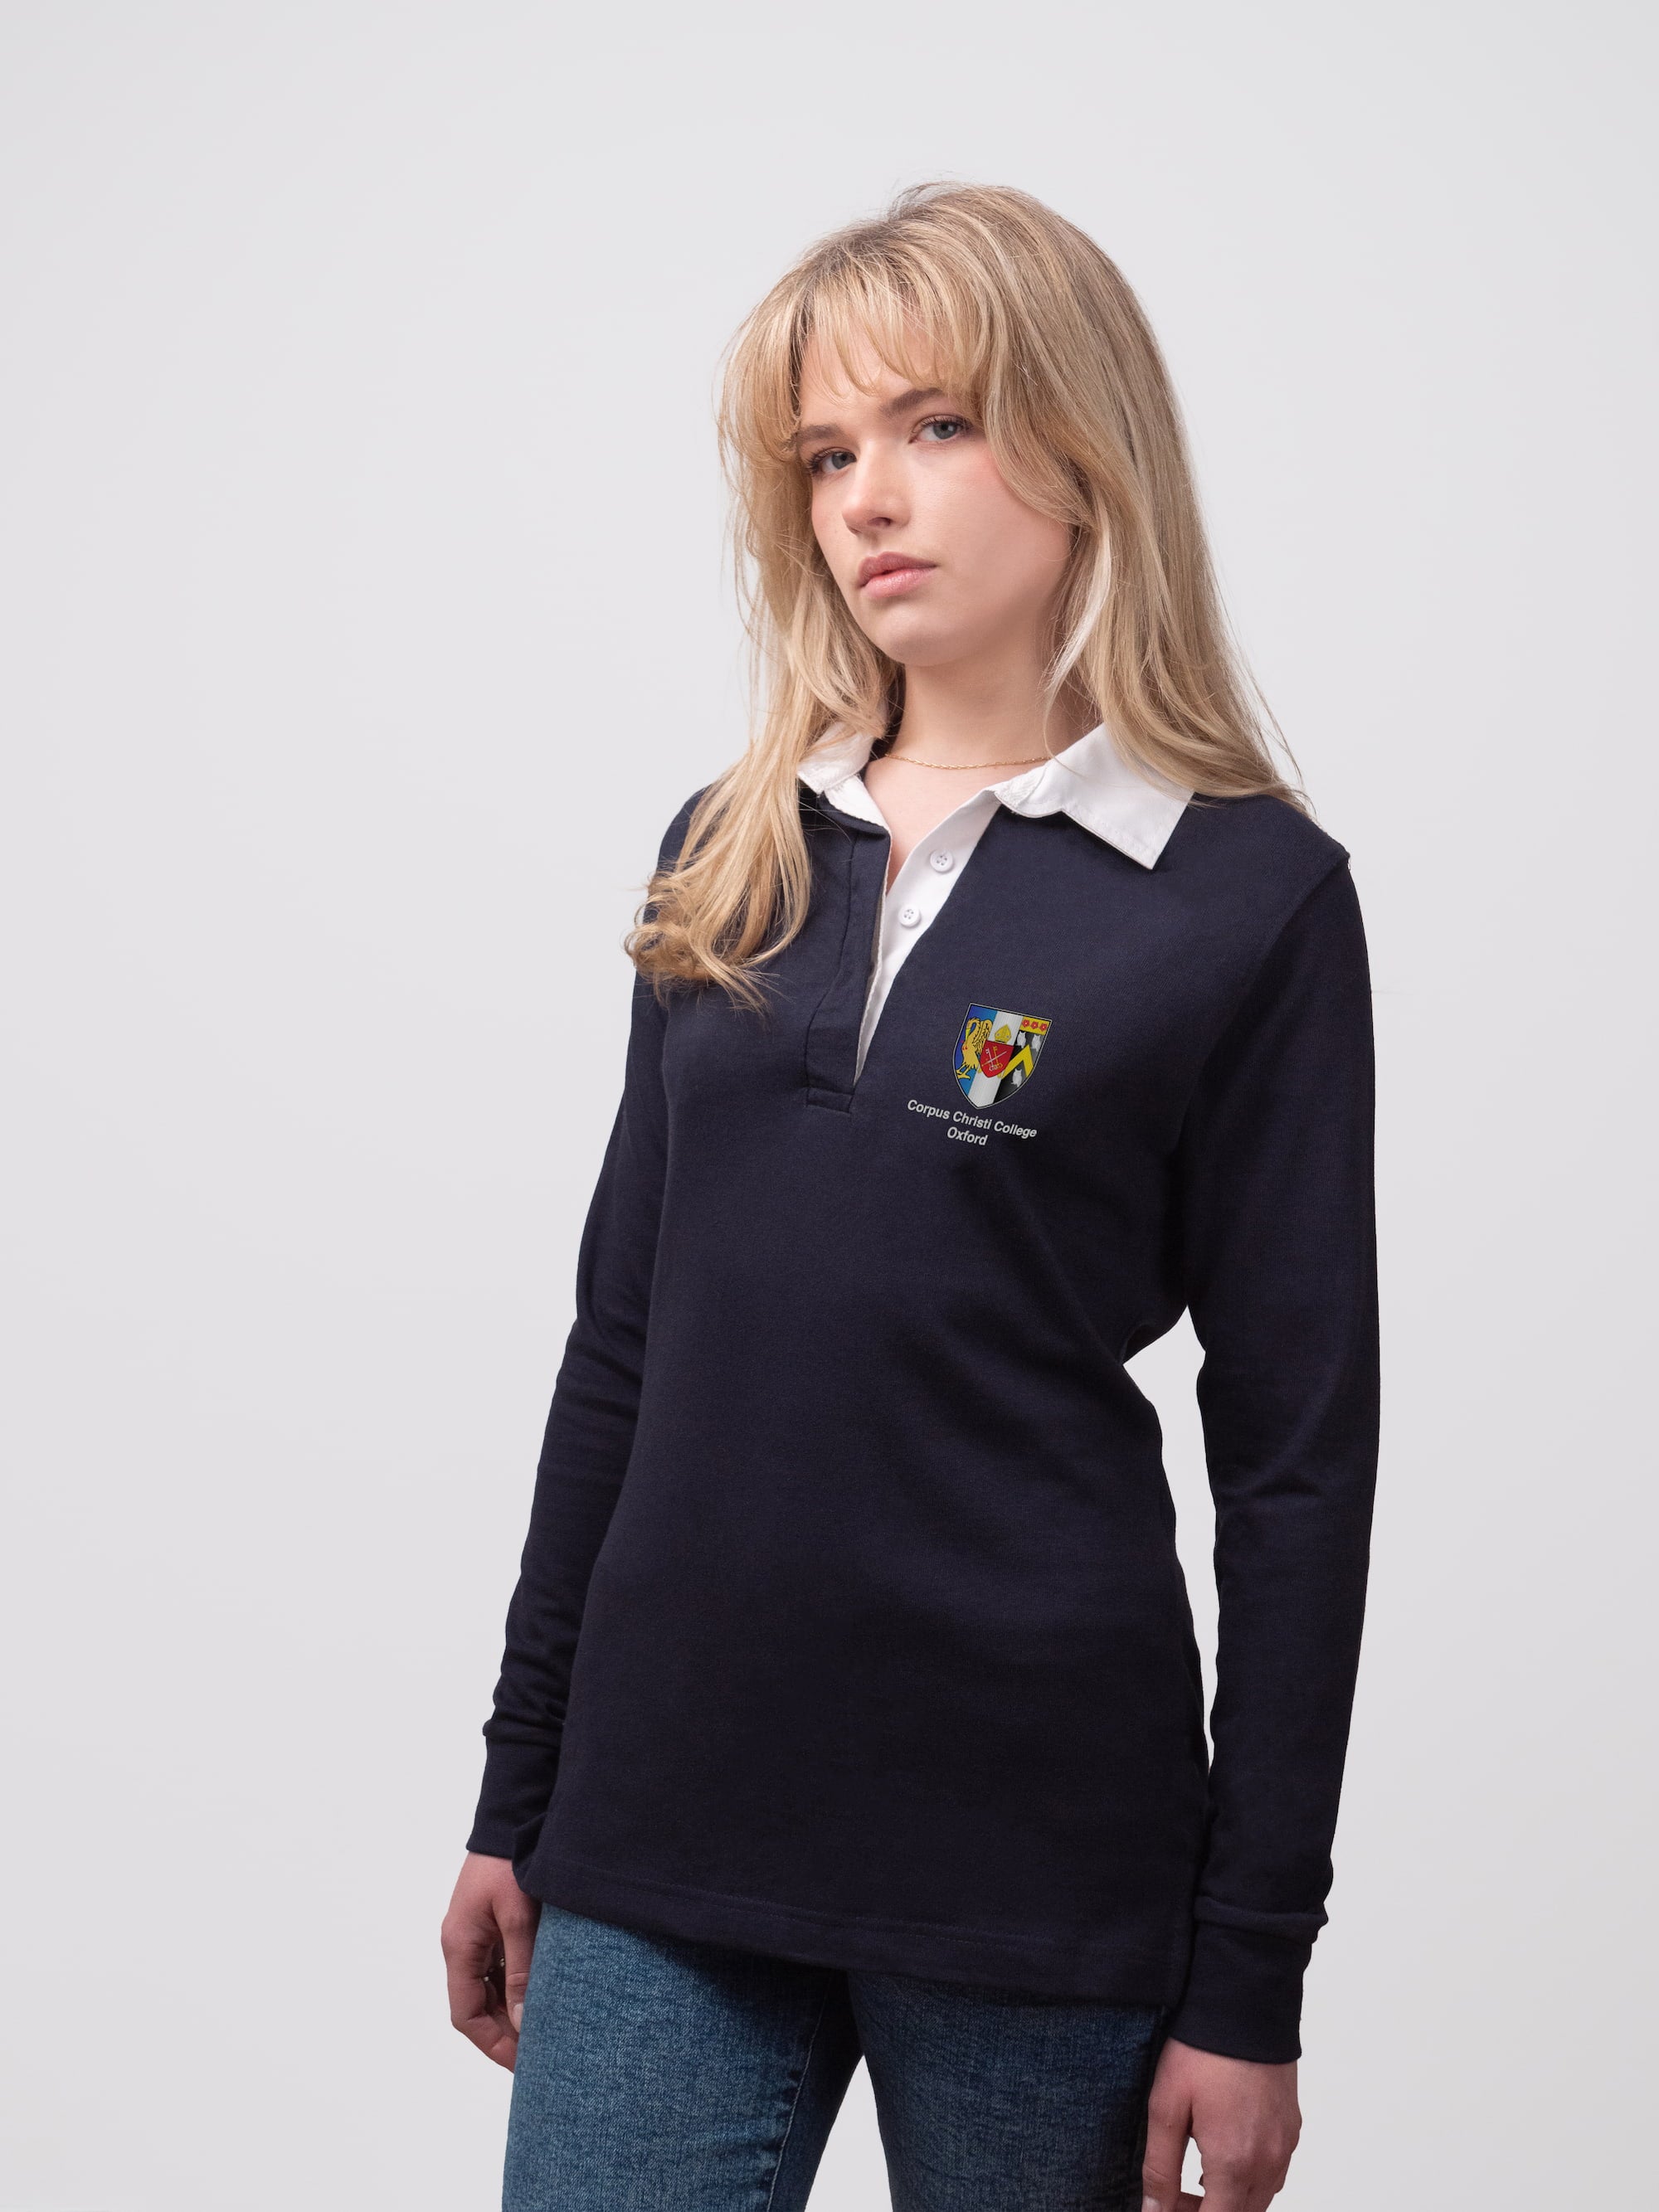 Student wearing a navy Corpus Christi College rugby shirt with embroidered crest